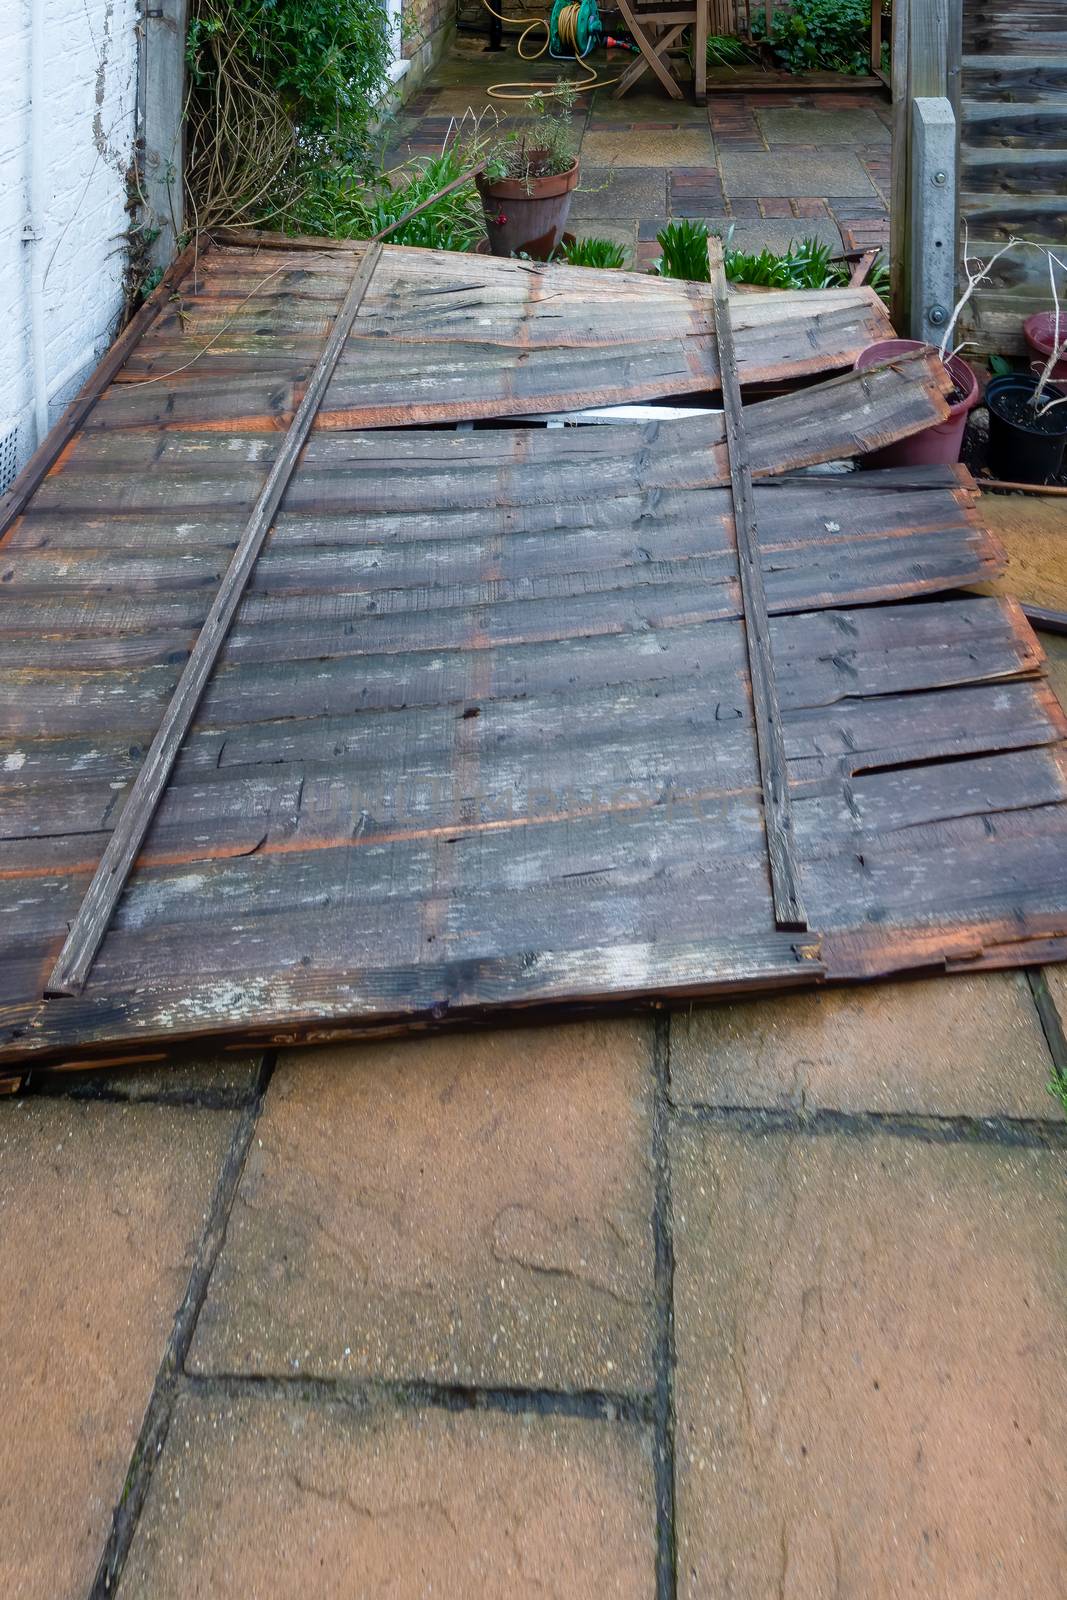 Residential wooden garden fence panel blown down by strong winds during a storm